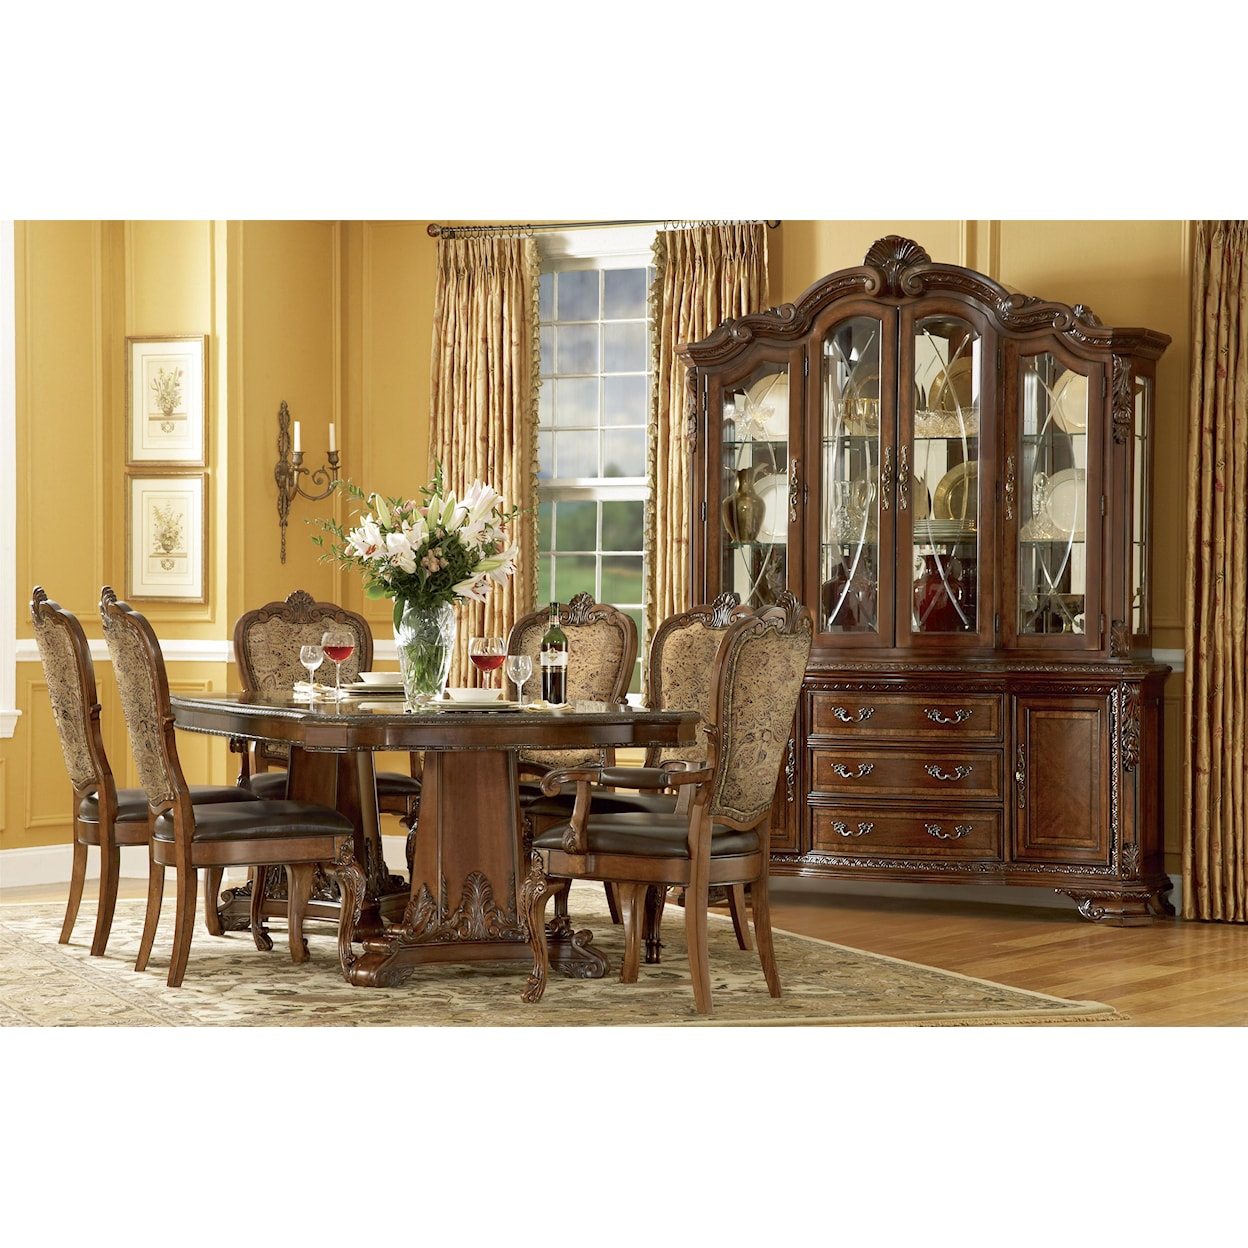 A.R.T. Furniture Inc Old World Formal Dining Room Group